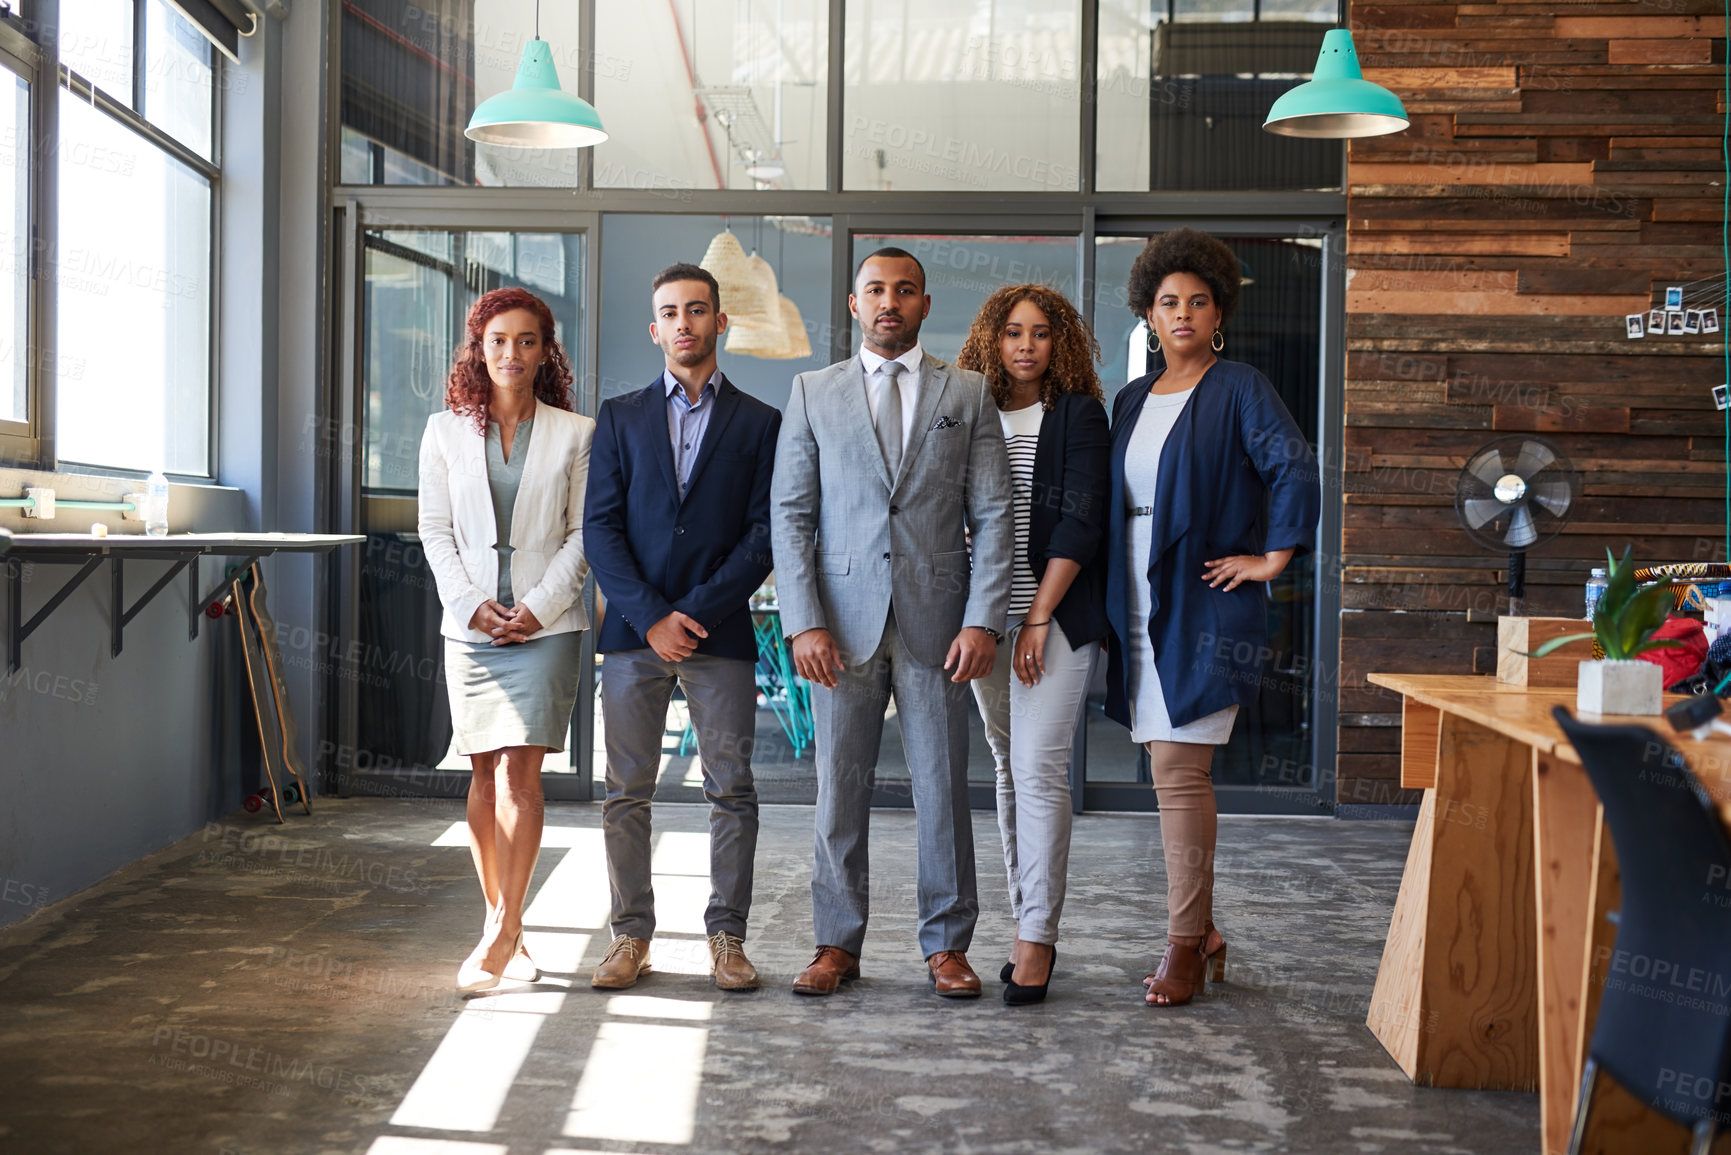 Buy stock photo Portrait of a group of businesspeople standing together in an office